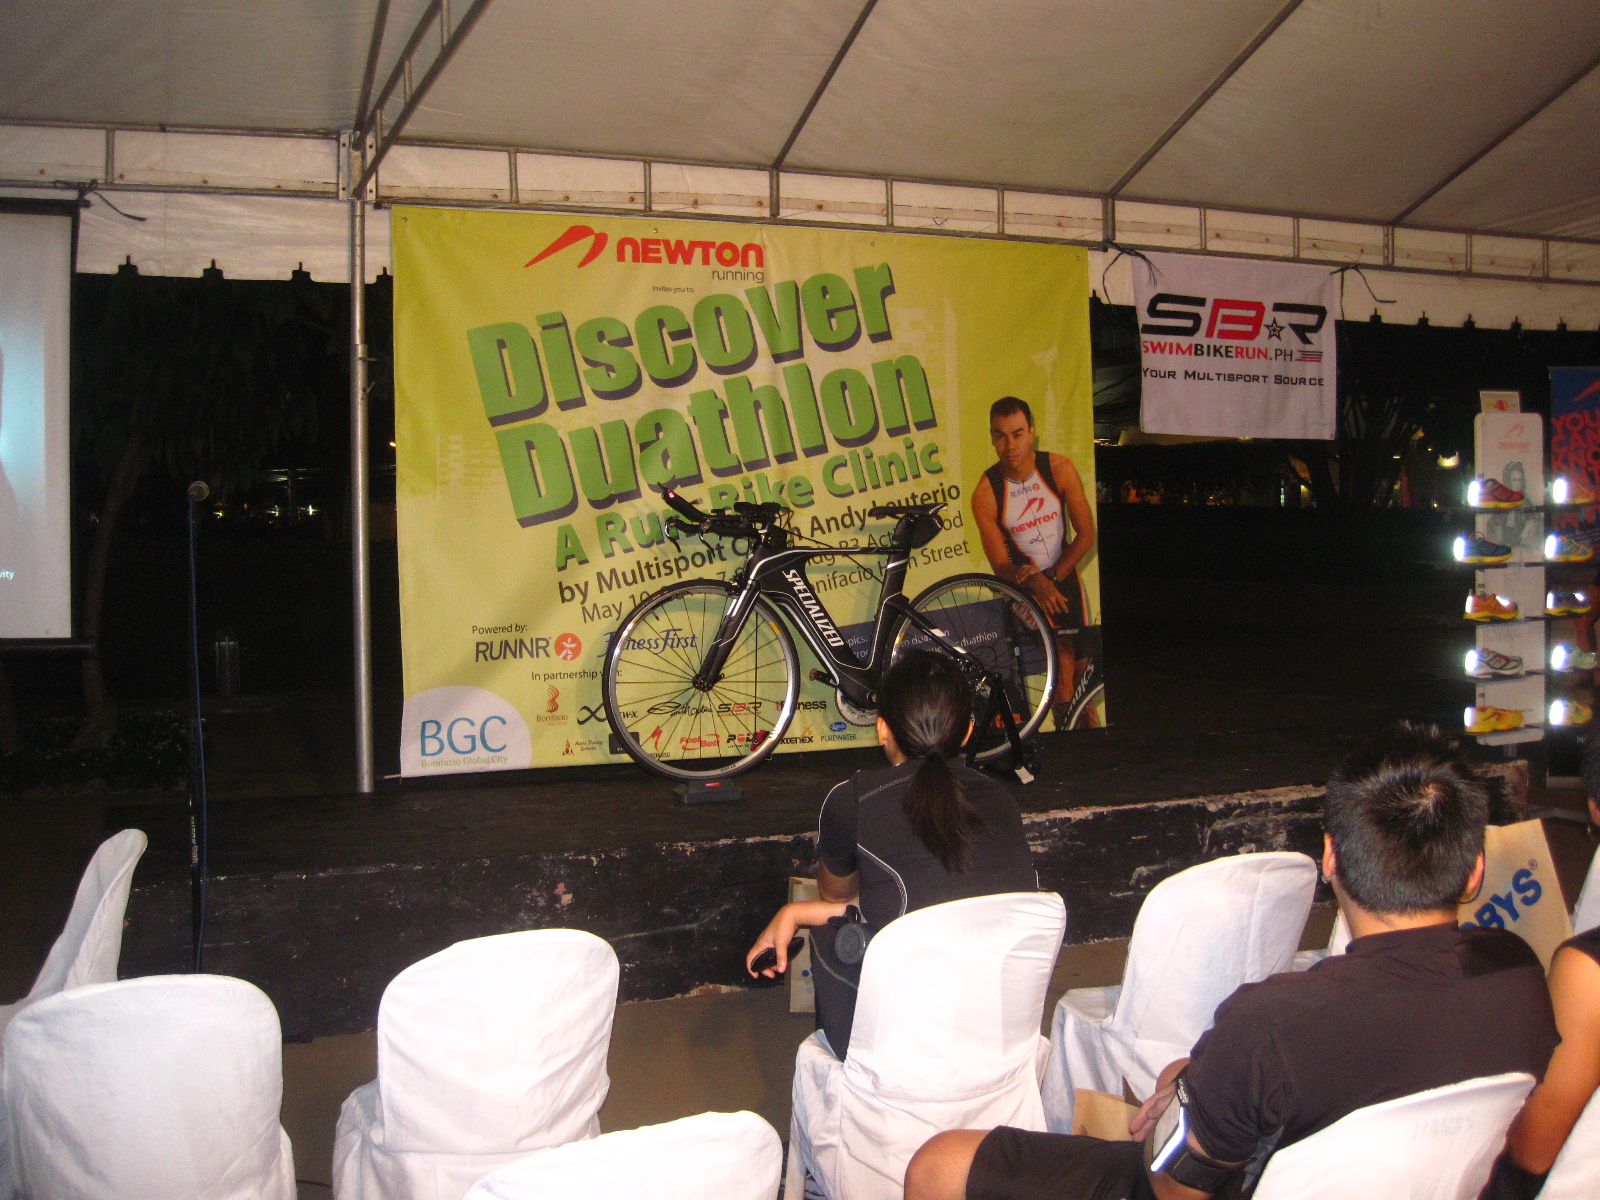 RUNNR Discover Duathlon: Setting the Stage